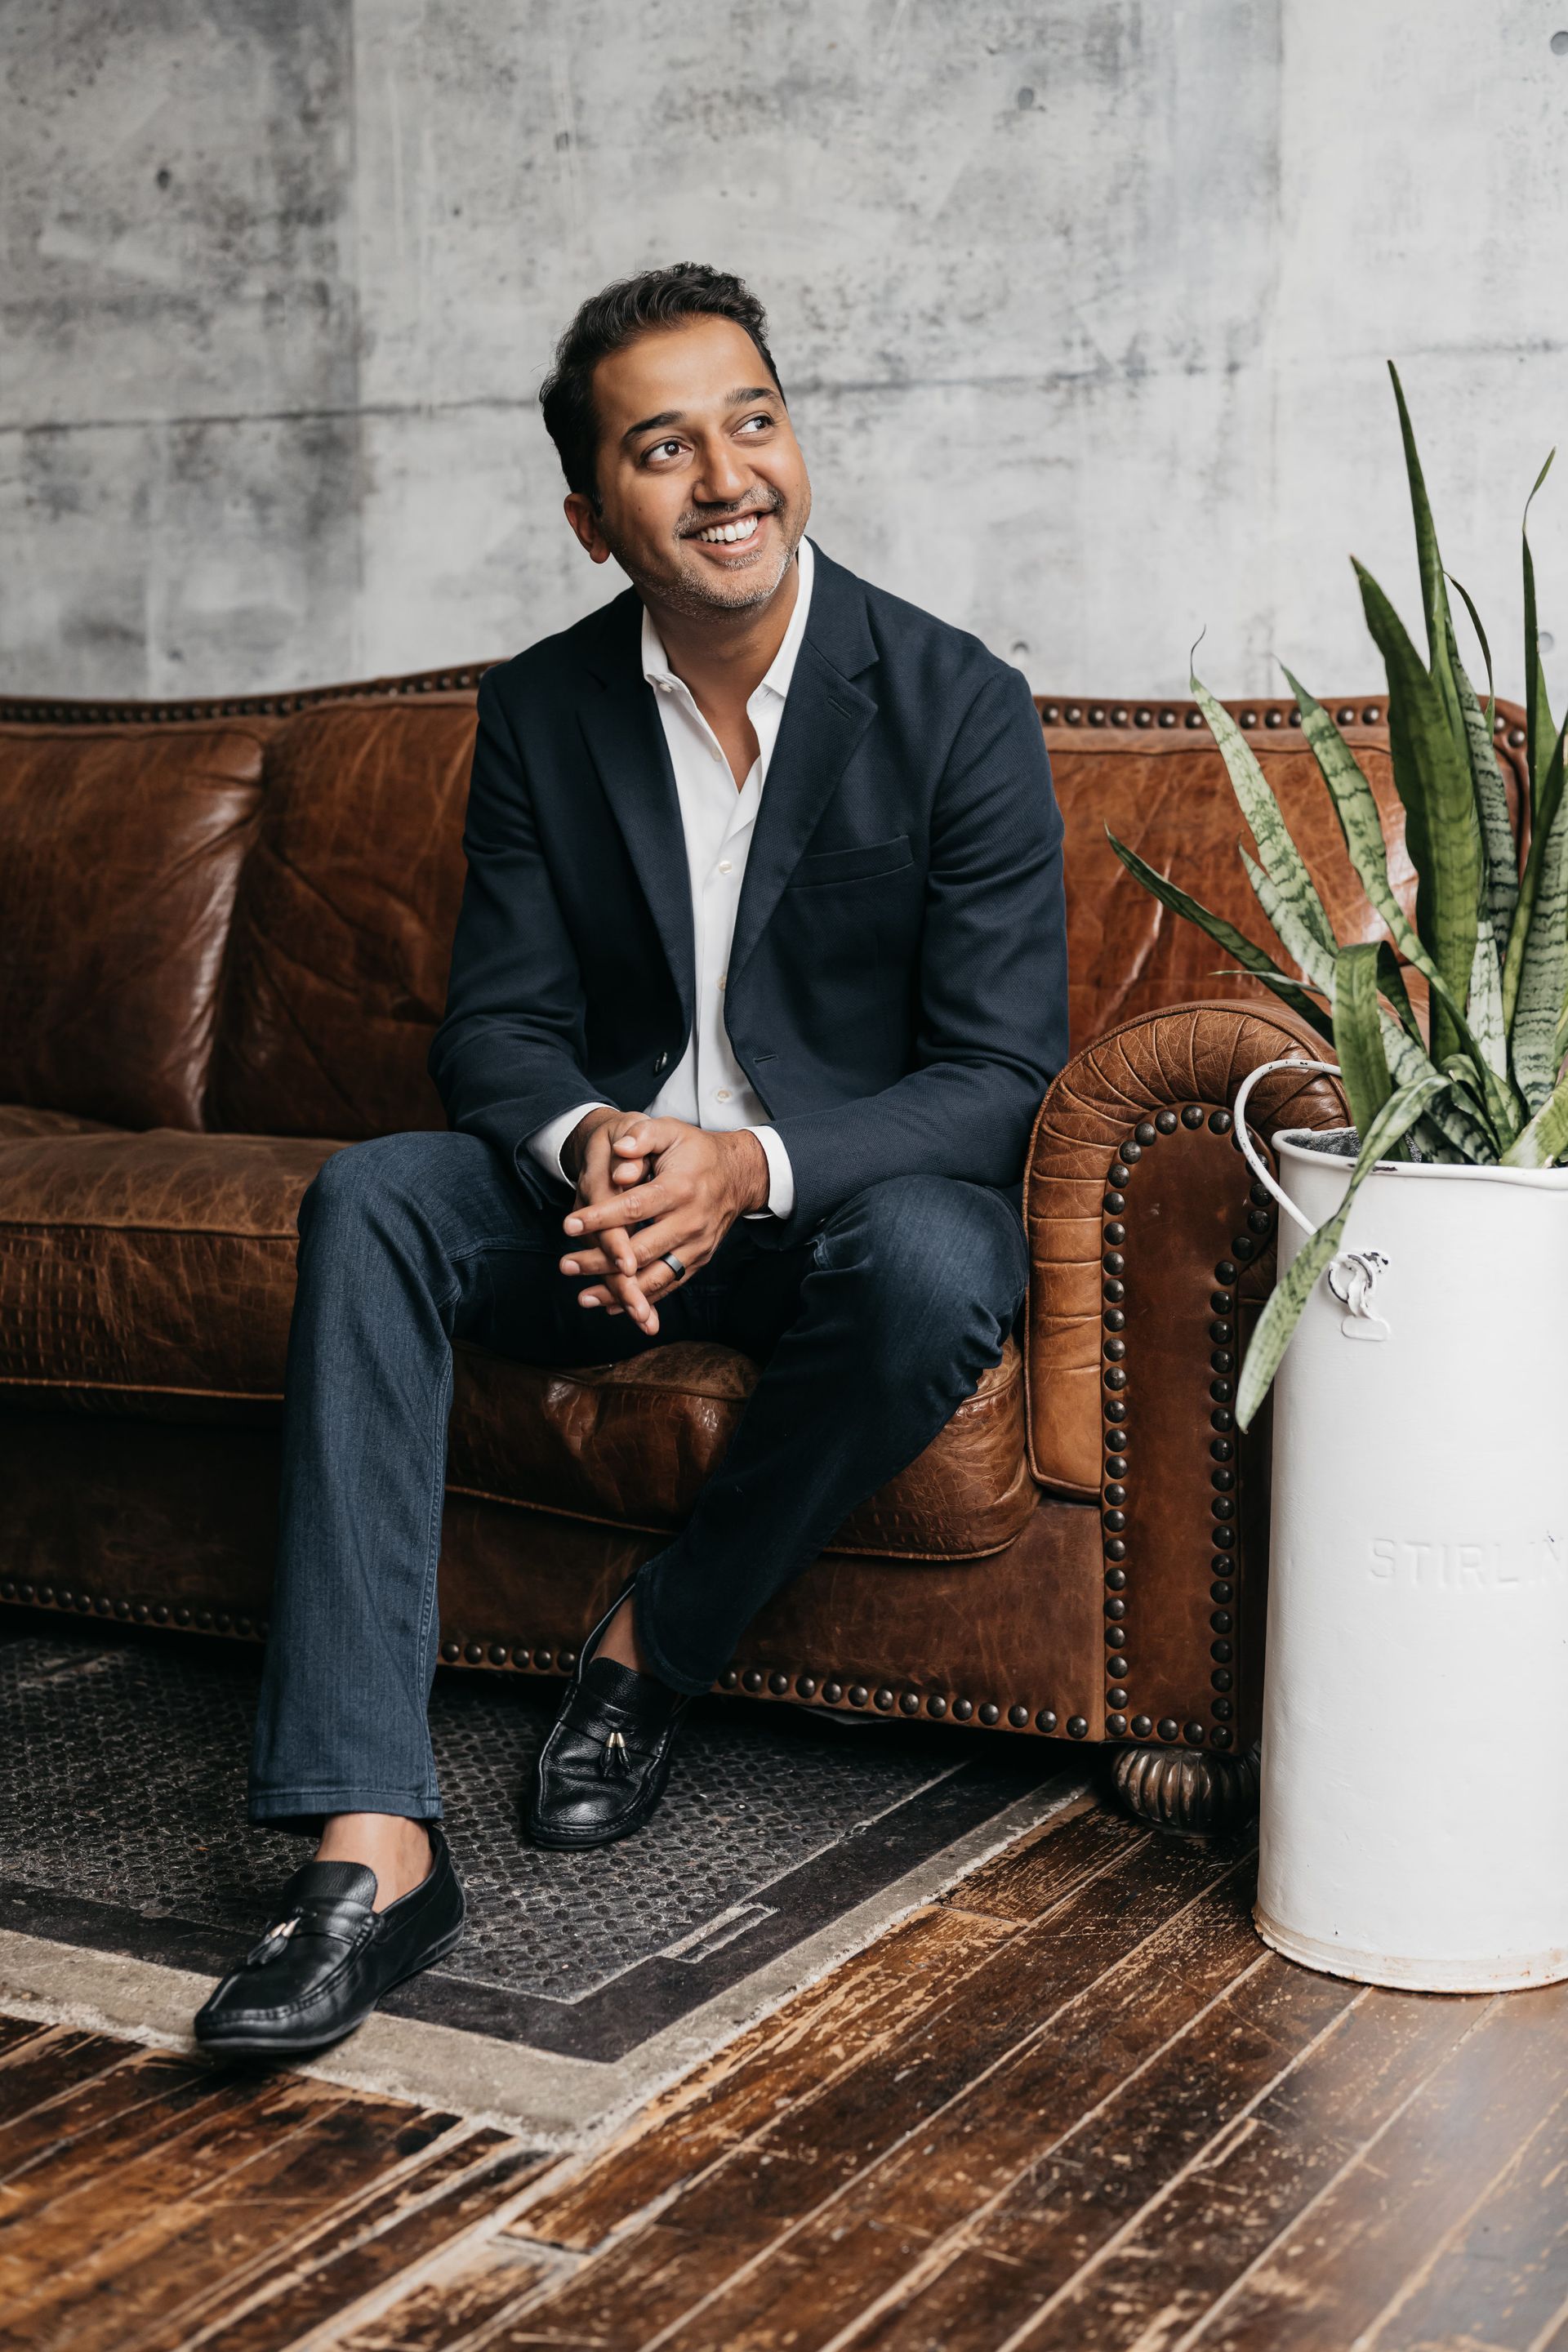 A corporate executive in a suit sitting on a couch with a potted plant.